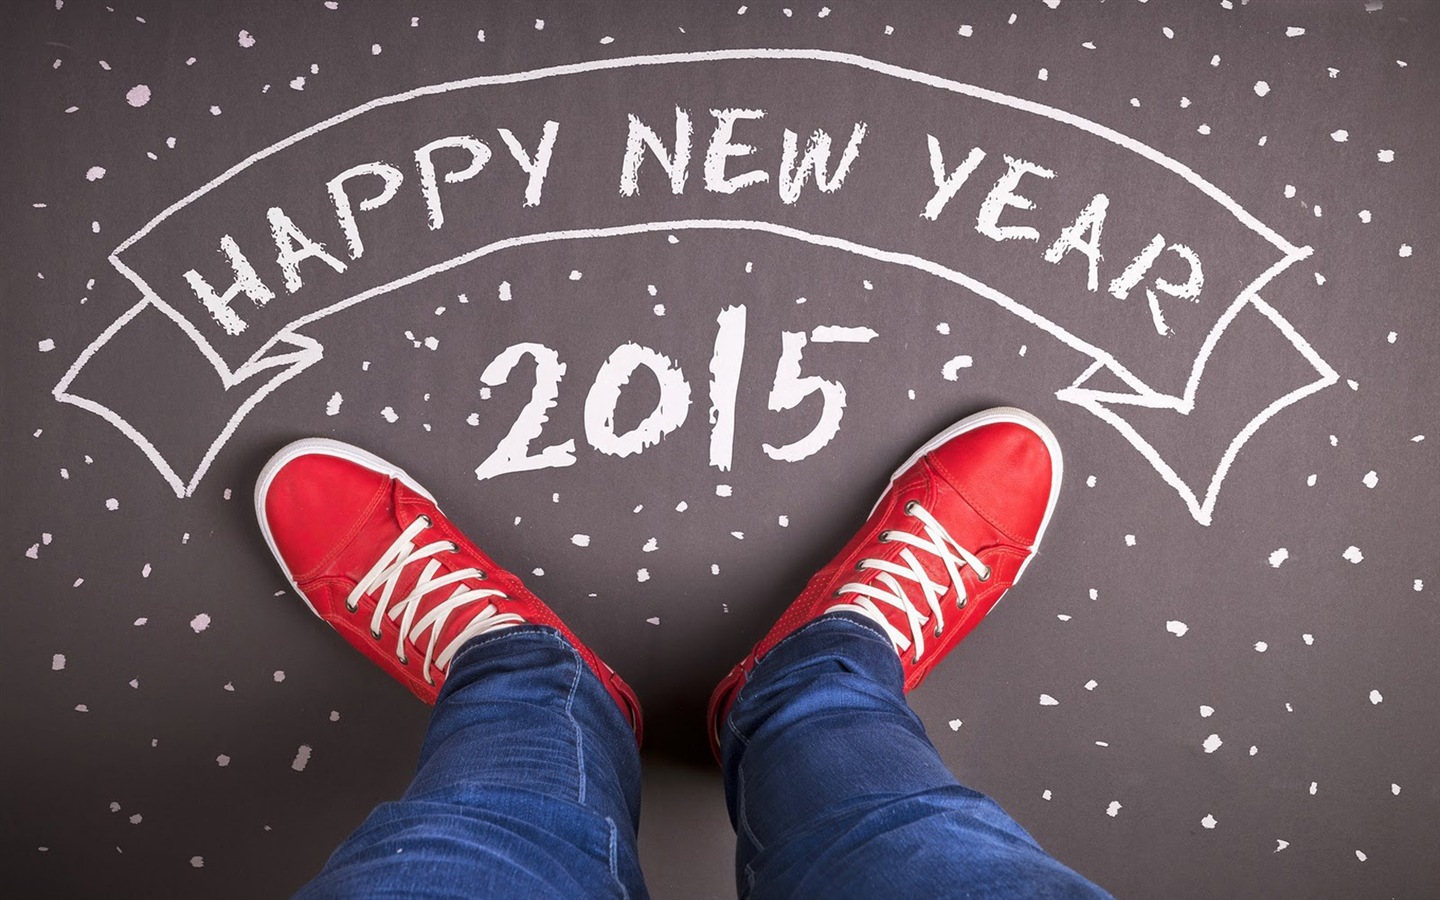 2015 New Year theme HD wallpapers (2) #15 - 1440x900